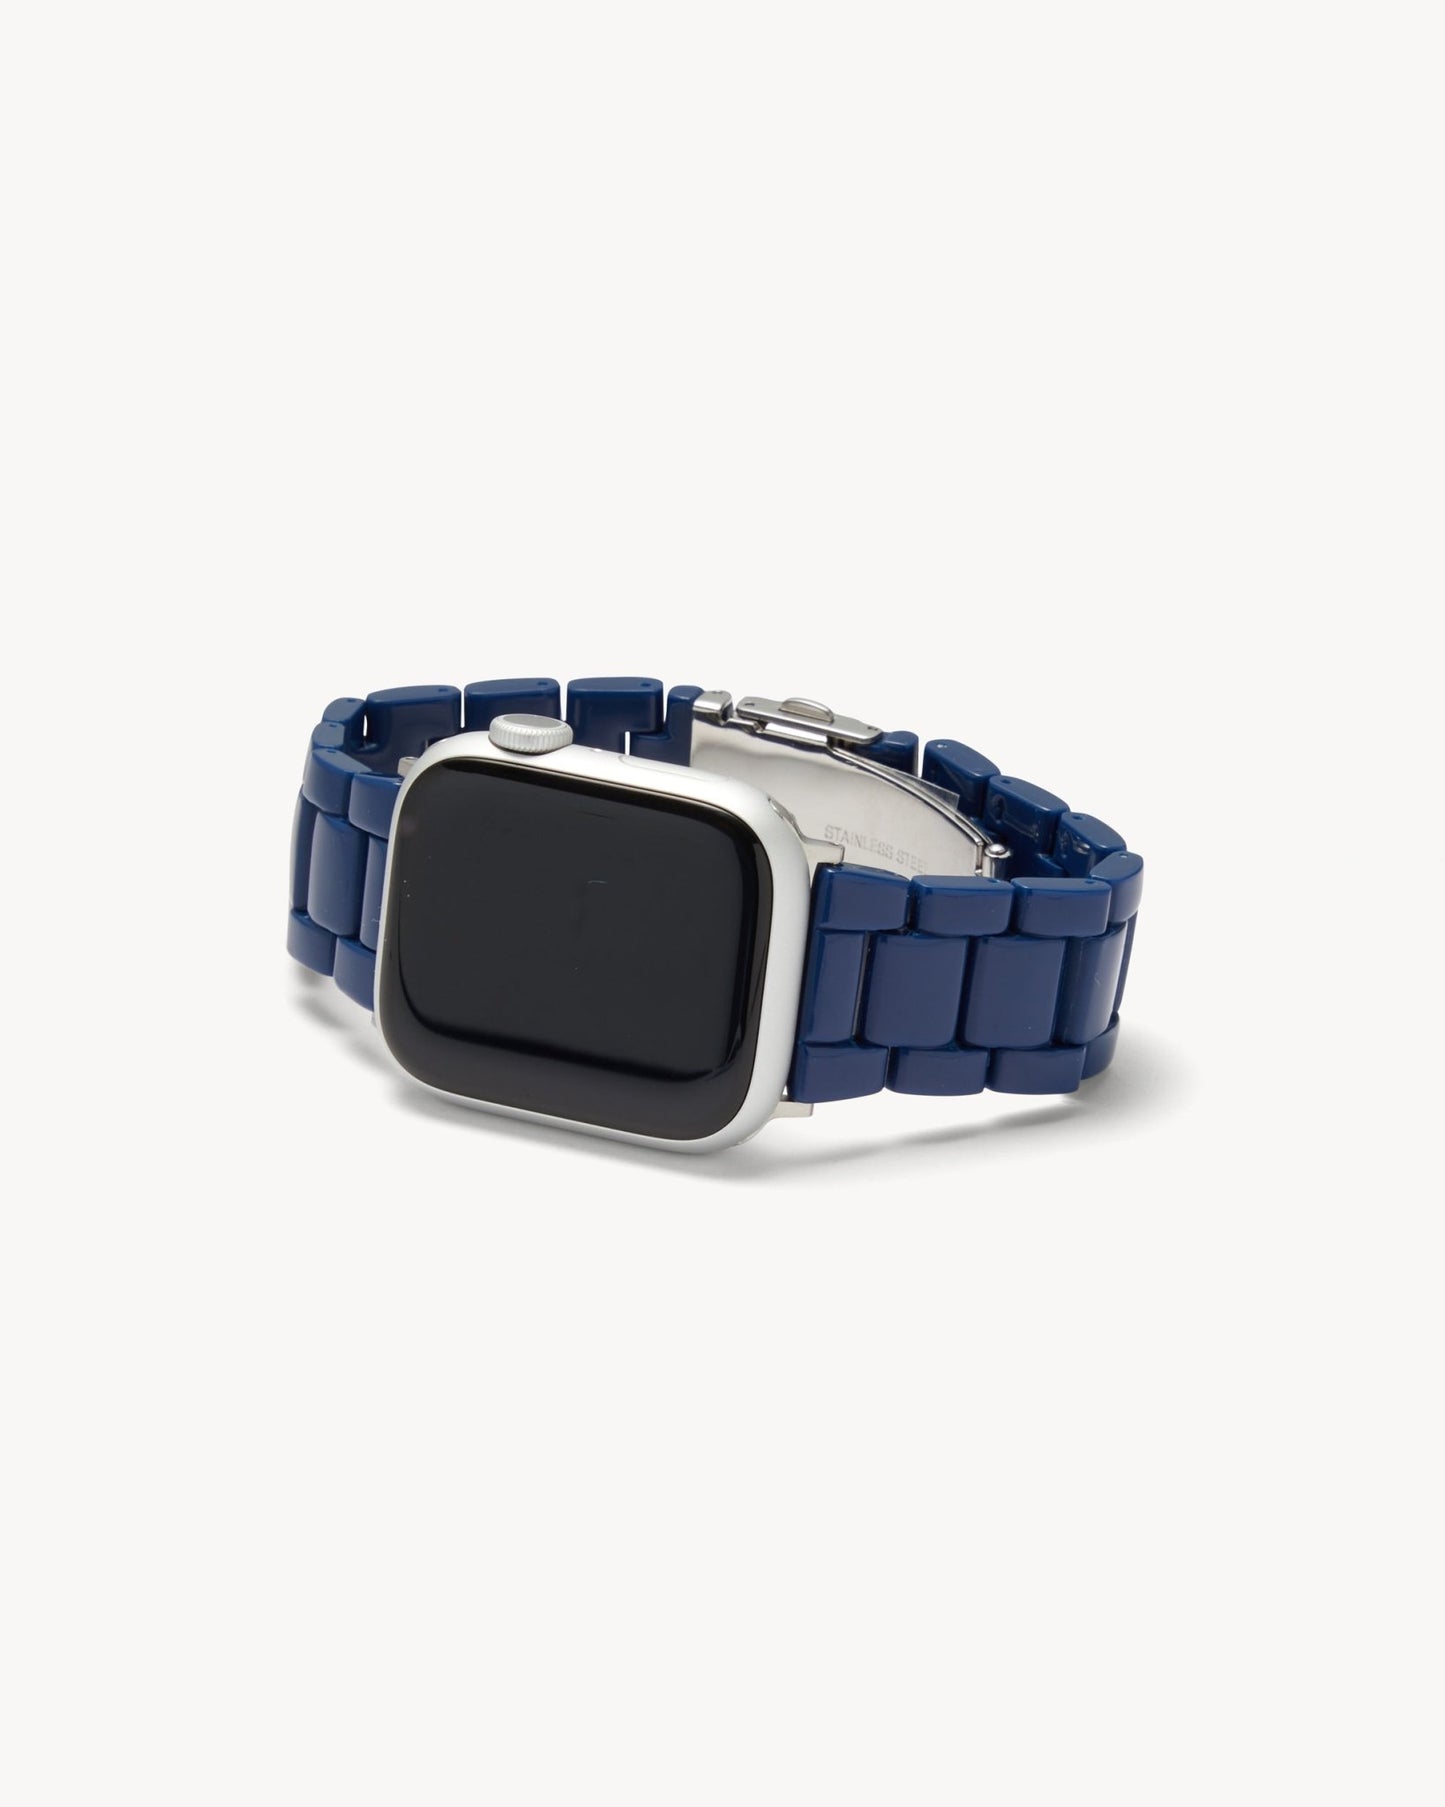 MACHETE Deluxe Apple Watch Band Set in French Navy